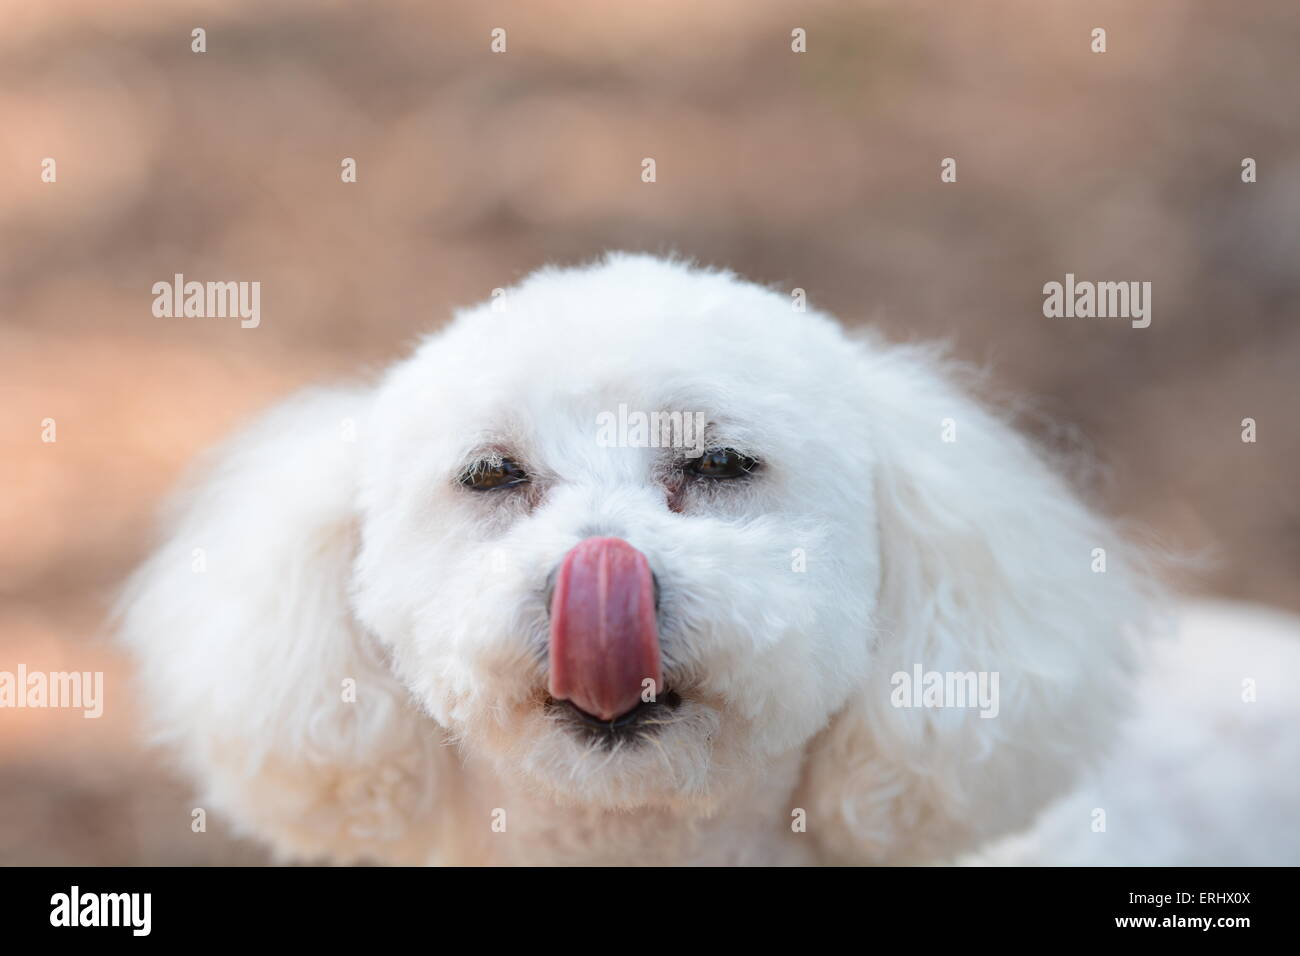 Dog touching nose with tongue Stock Photo